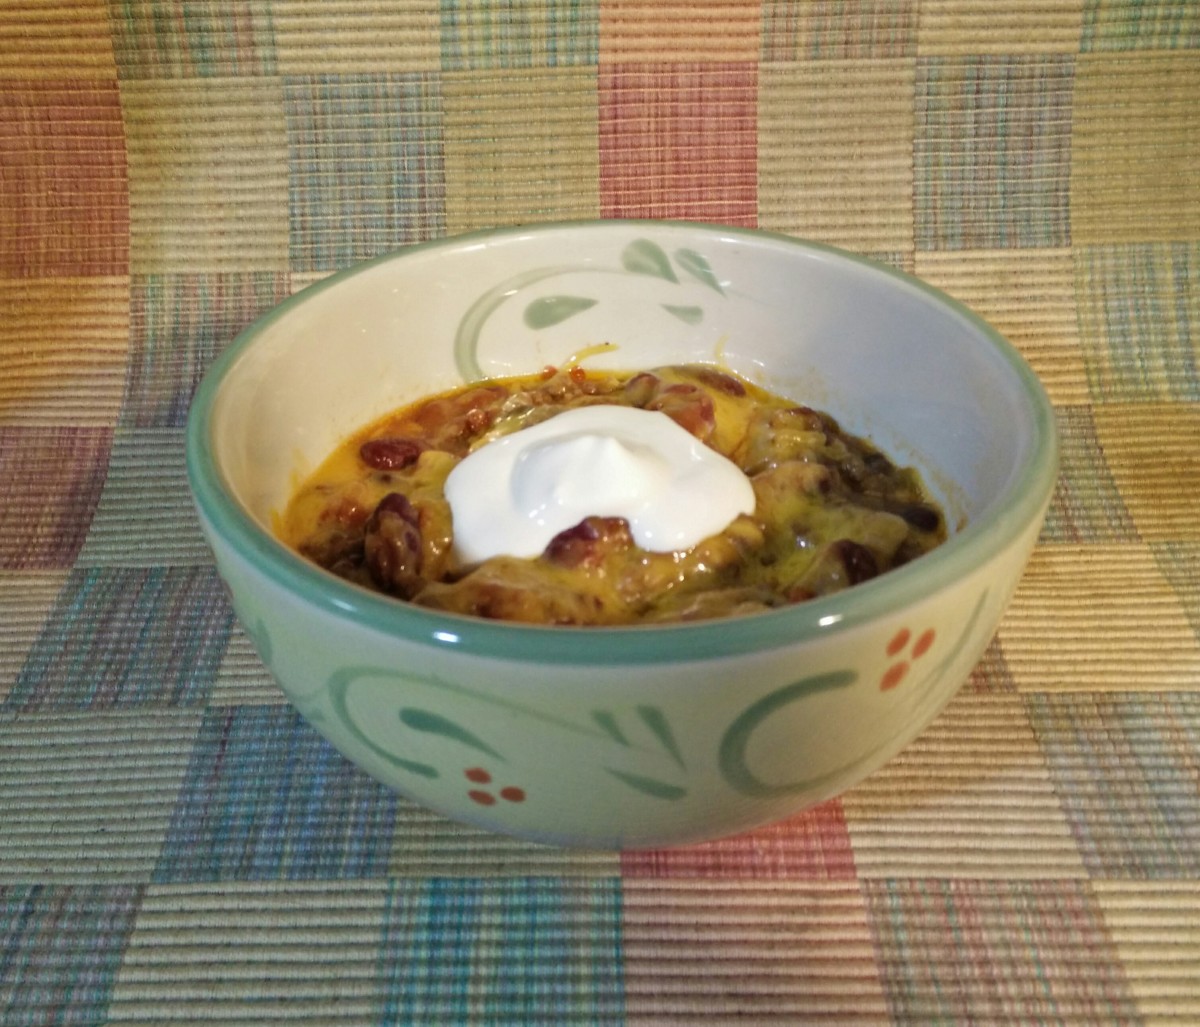 I like chili with more cheese and sour cream.  Yum, but contrary to what Oprah says, no bread.